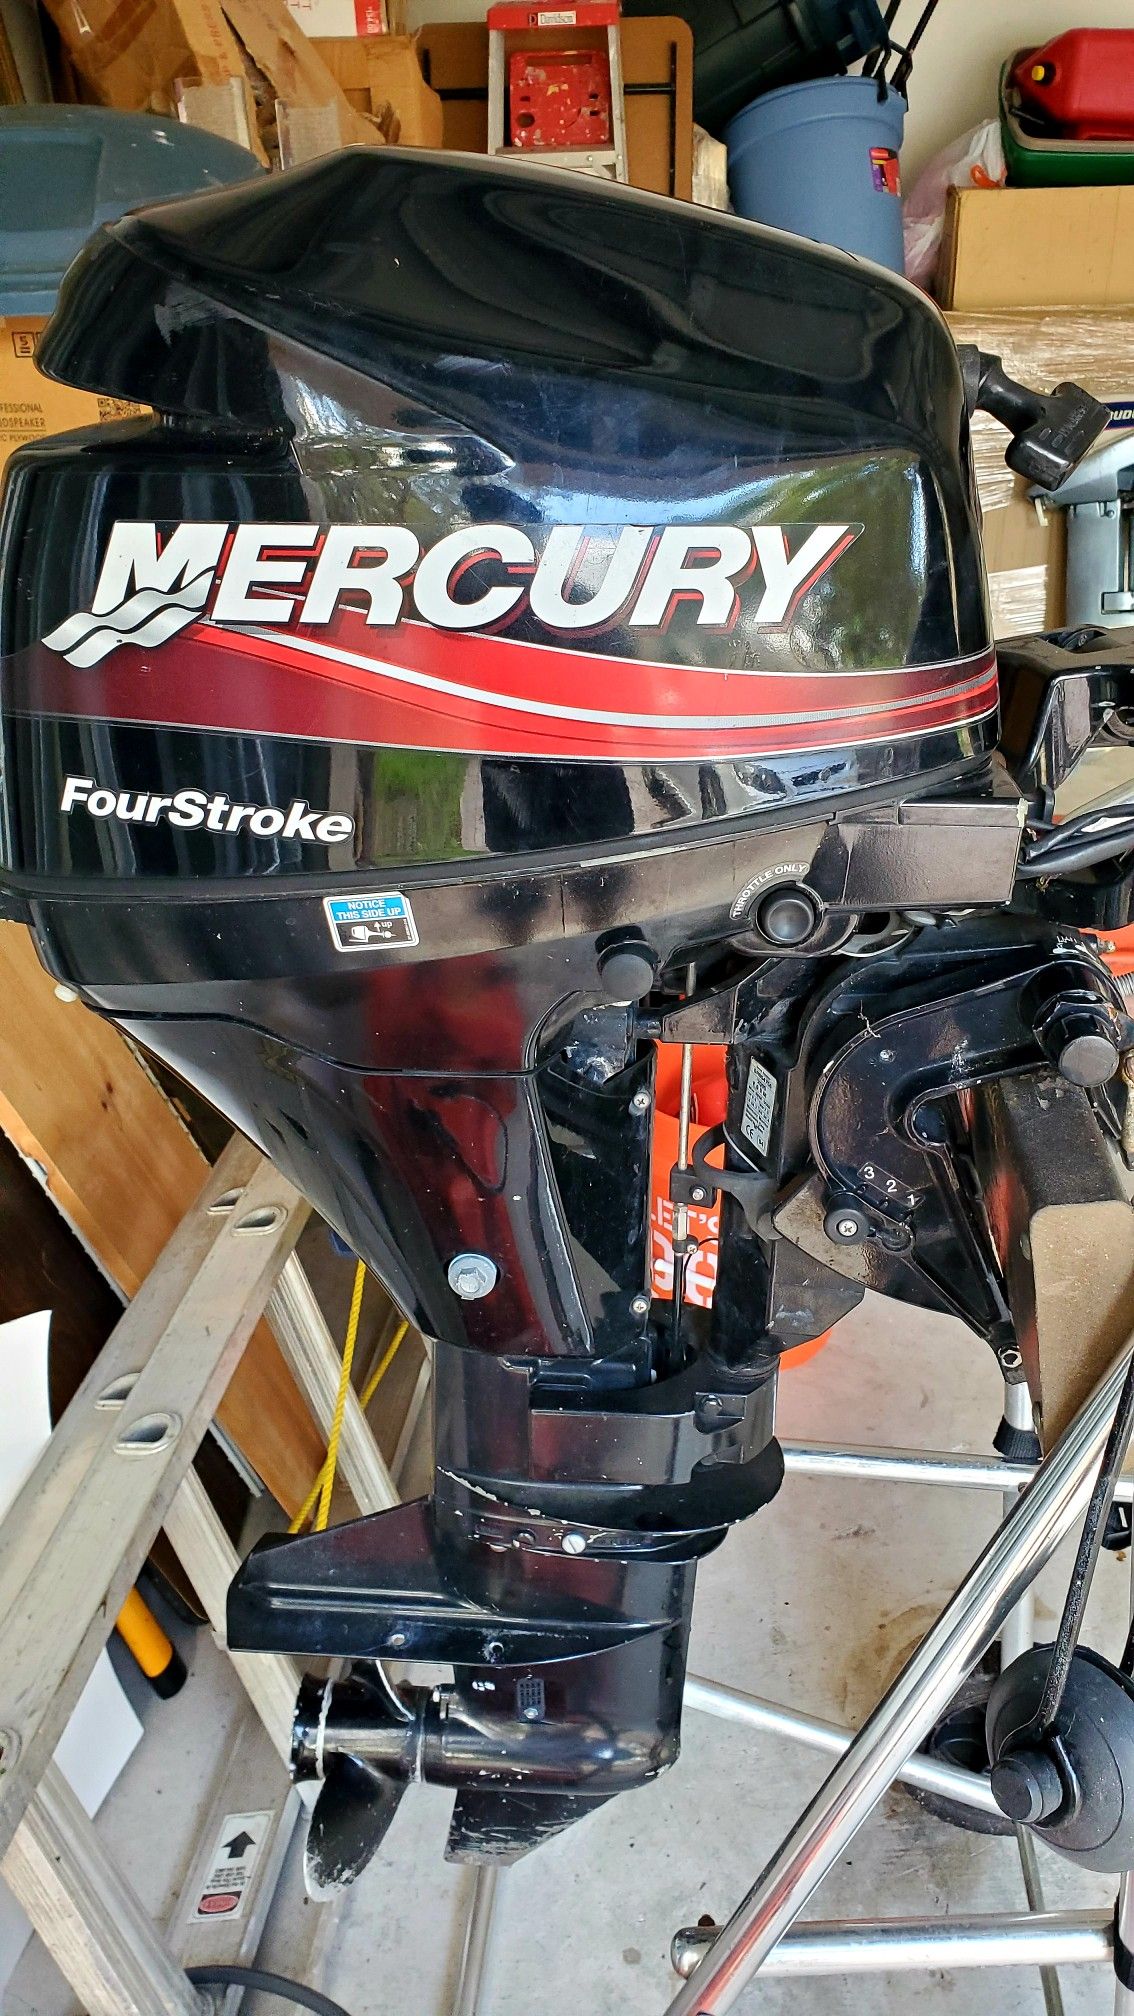 Mercury 9.9 hp 4 strokes outboard motor - Excellent condition - Short shaft